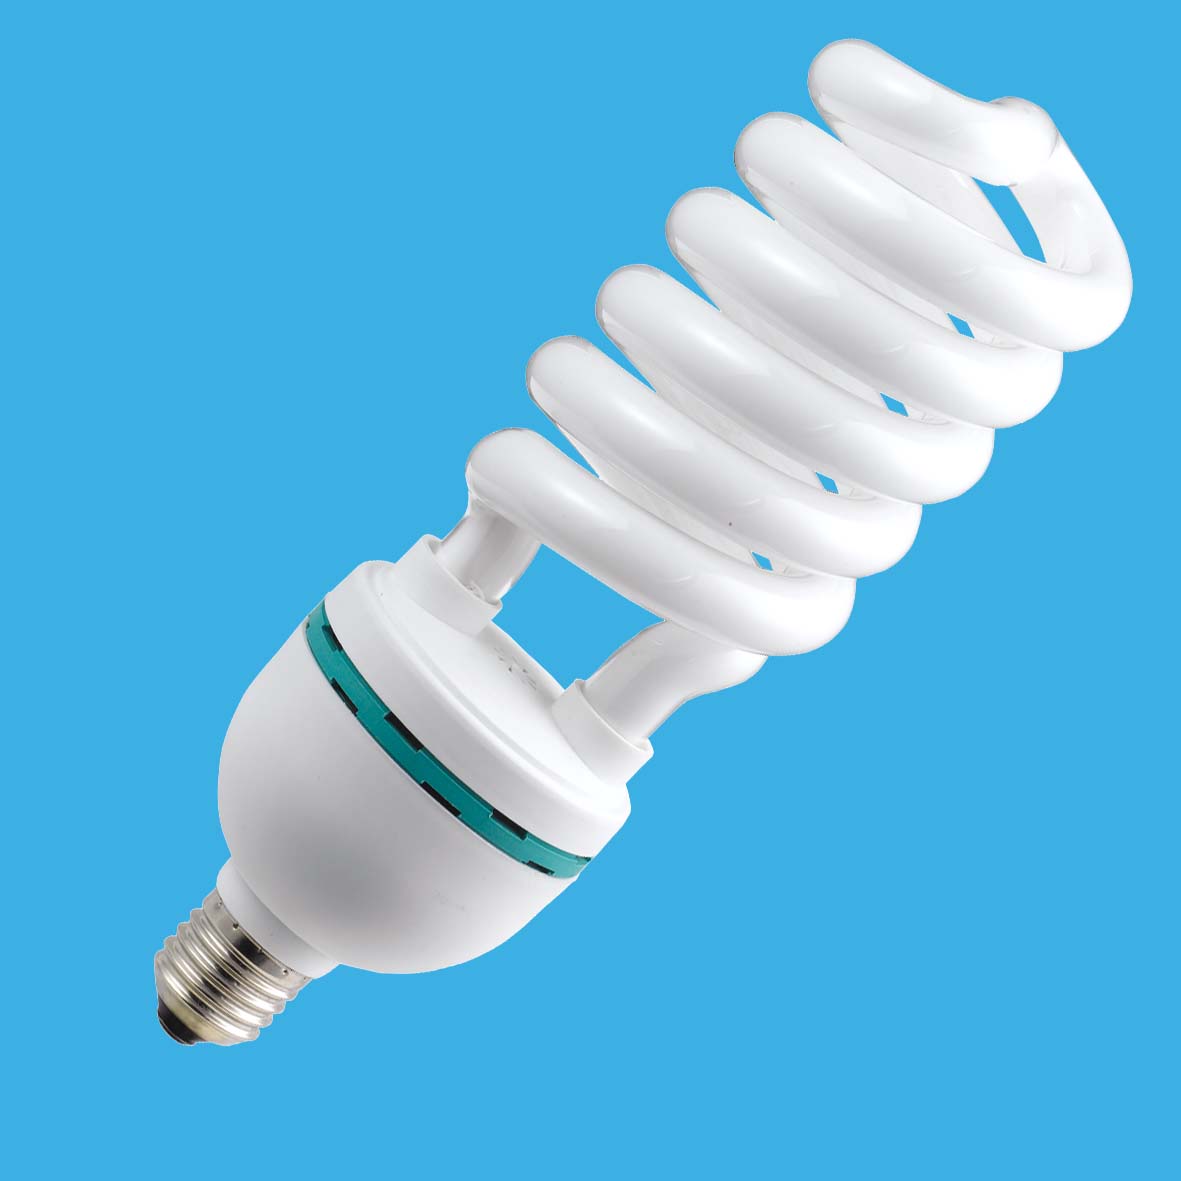 The Cheapest 12w 20w 32w 26w Half Spiral Compact fluorescent lamp high quality 8000 hours e27 e40 CFL Bulb Energy Saving Lamp